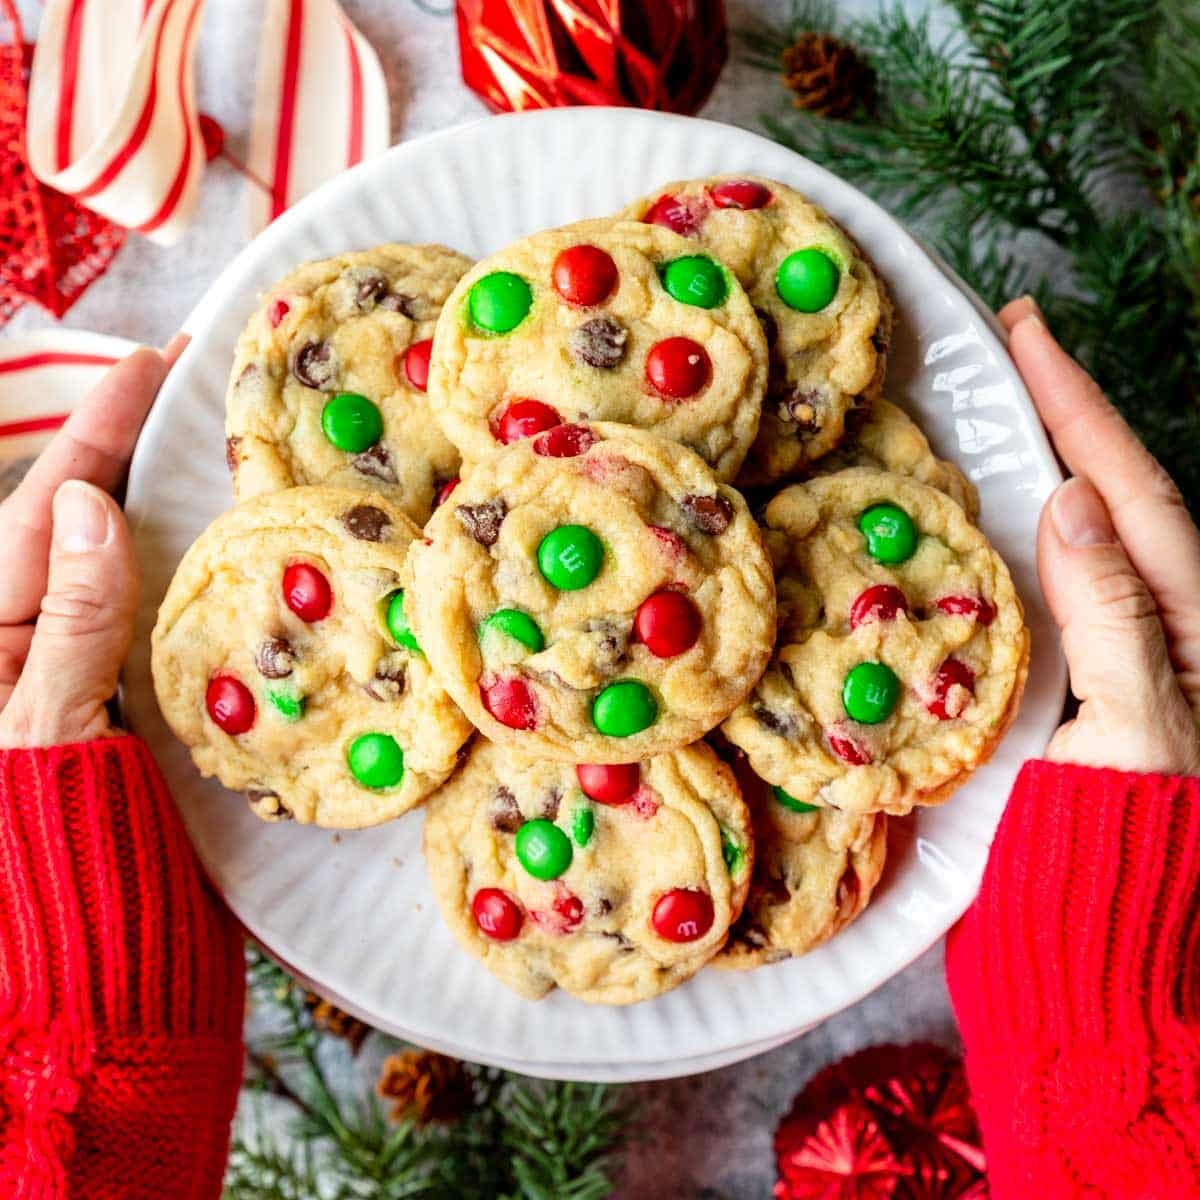 a large plate full of Christmas Chocolate Chip Cookies with Christmas red and green M&M's